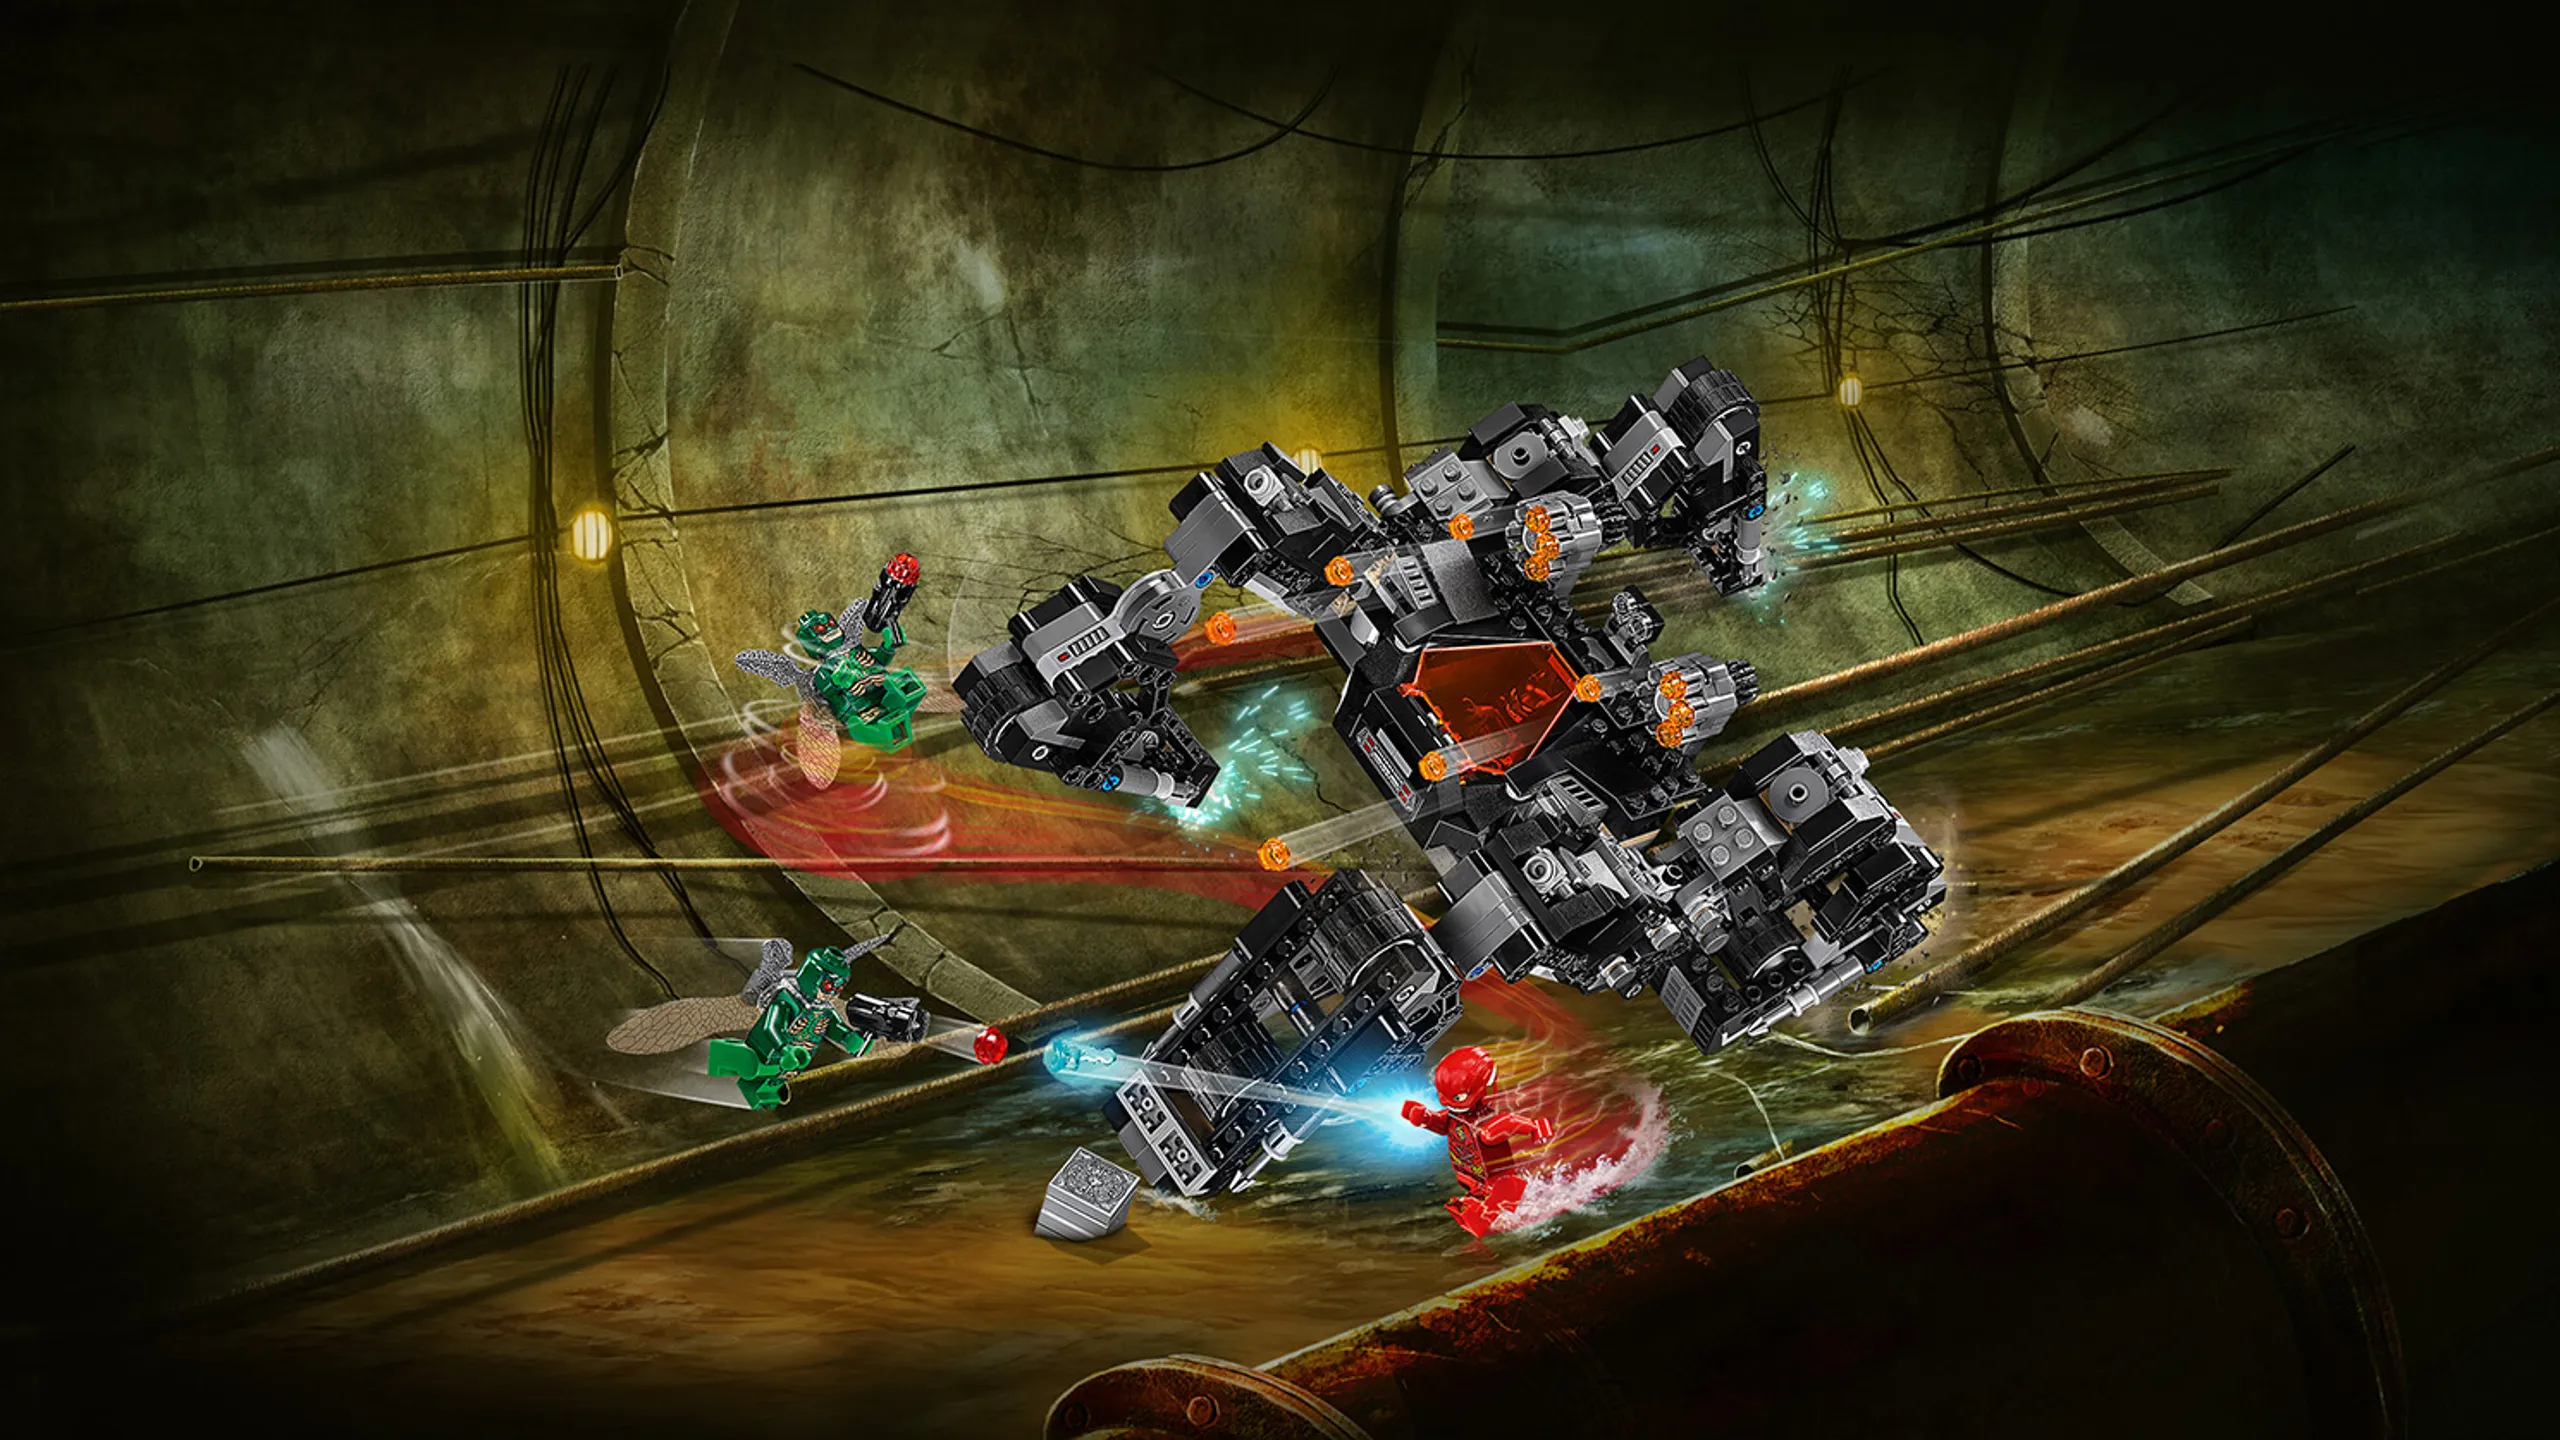 LEGO Super Heroes - 76086 Knightcrawler Tunnel Attack - Enter the tunnels of Stryker’s Island in Batman’s super-flexible Knightcrawler to take on the evil Parademons!